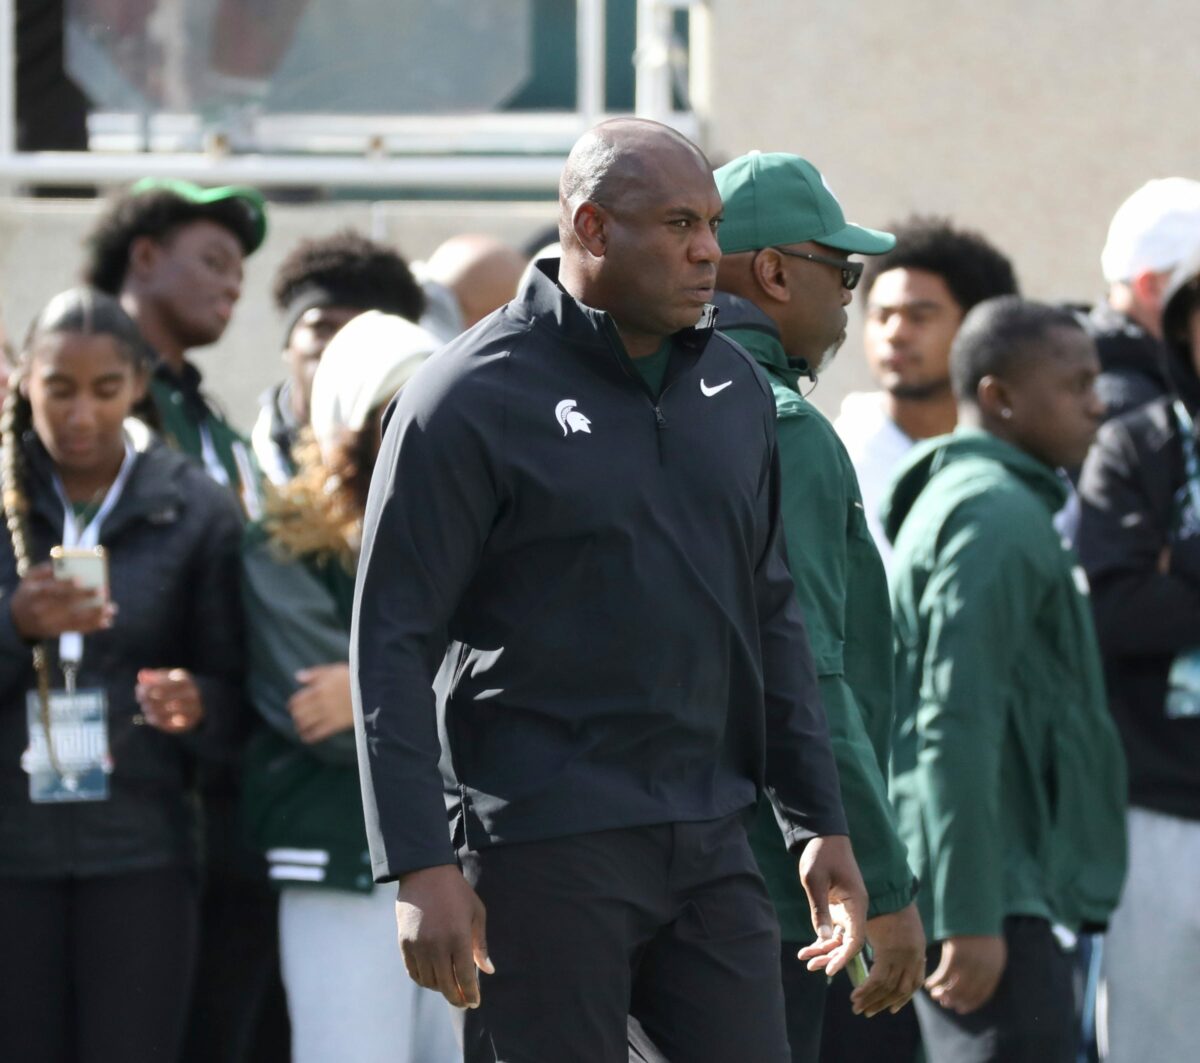 WATCH: What Michigan State head coach Mel Tucker said about Ohio State after the game